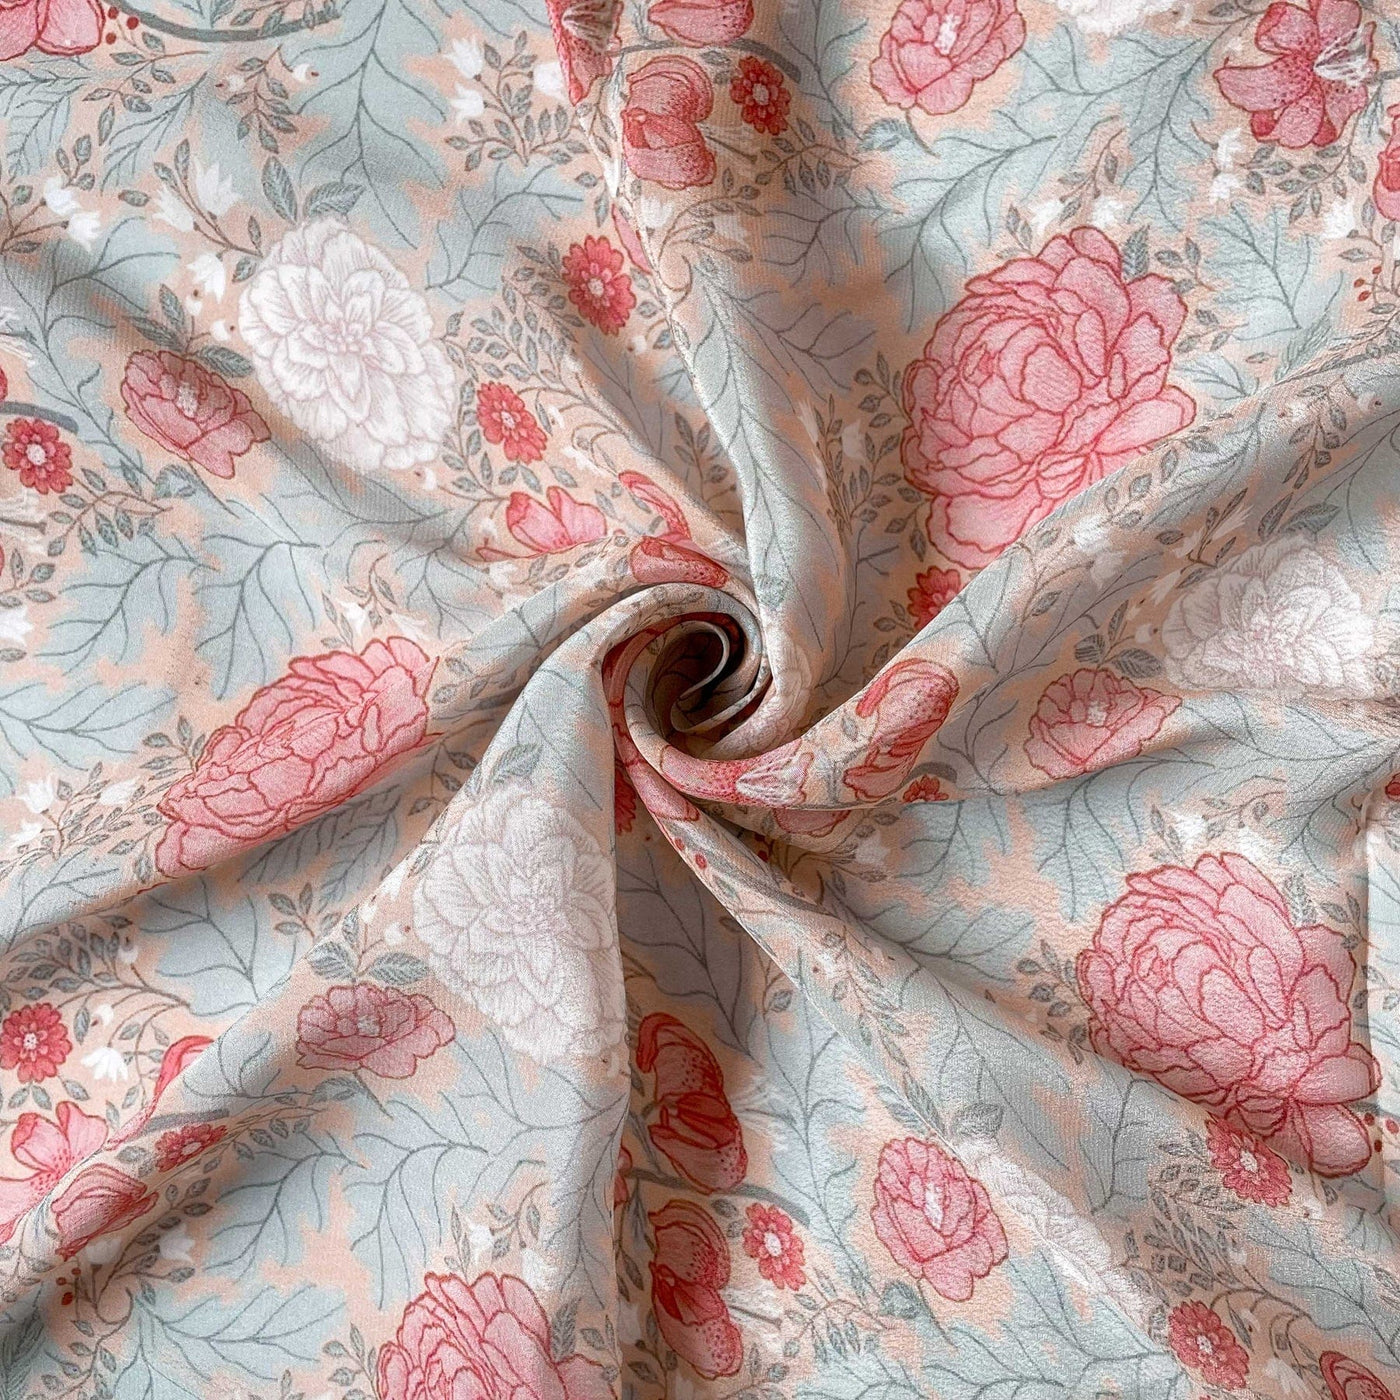 Fabric Pandit Fabric Peach Rose and Blue Garden of Roses Digital Printed Pure Crepe Fabric (Width 43 Inches)